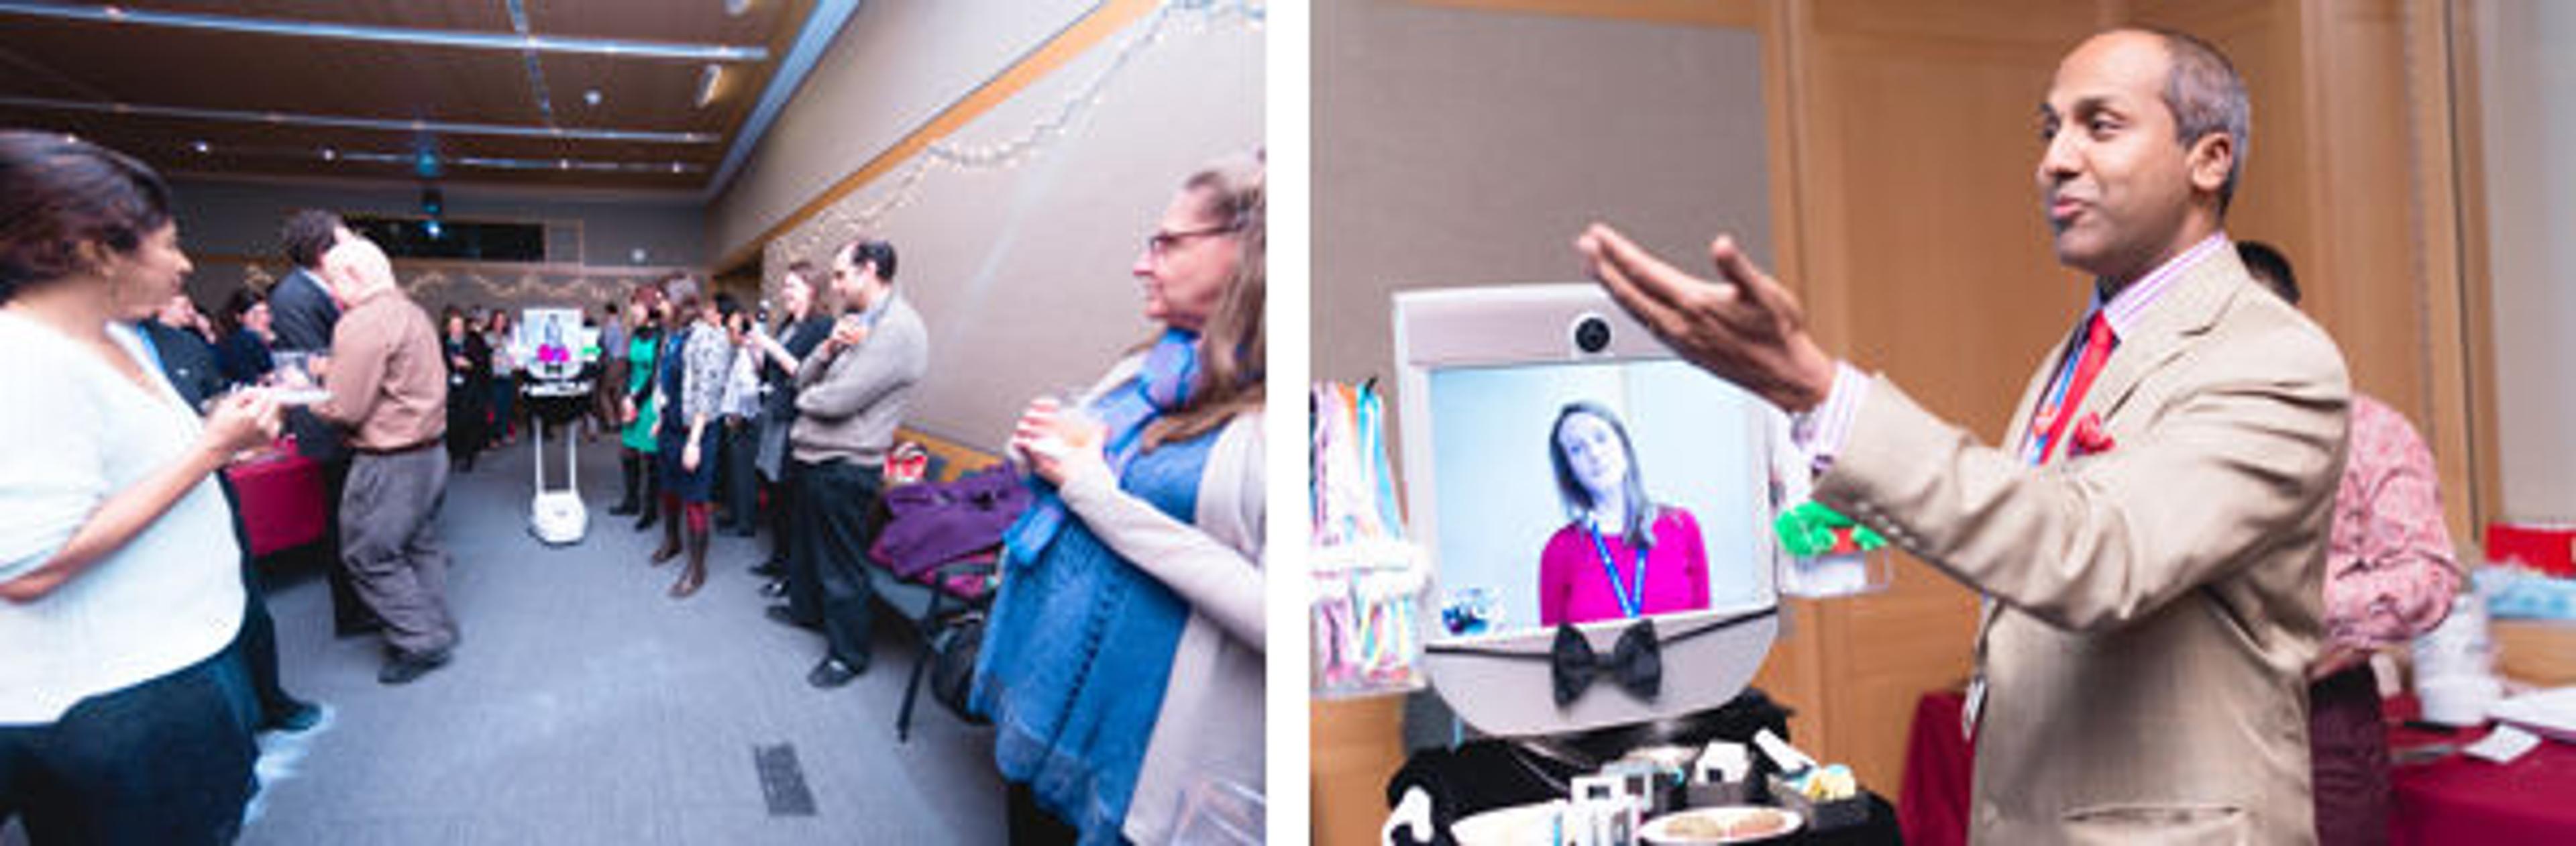 Left: The Beam Telepresence Robot makes its debut, bearing gifts for the Department of Digital Media's staff holiday party. Right: Chief Digital Media Officer Sree Sreenivasan interviews Access Programs Coordinator Jan Ingvalson while she operates the Beam